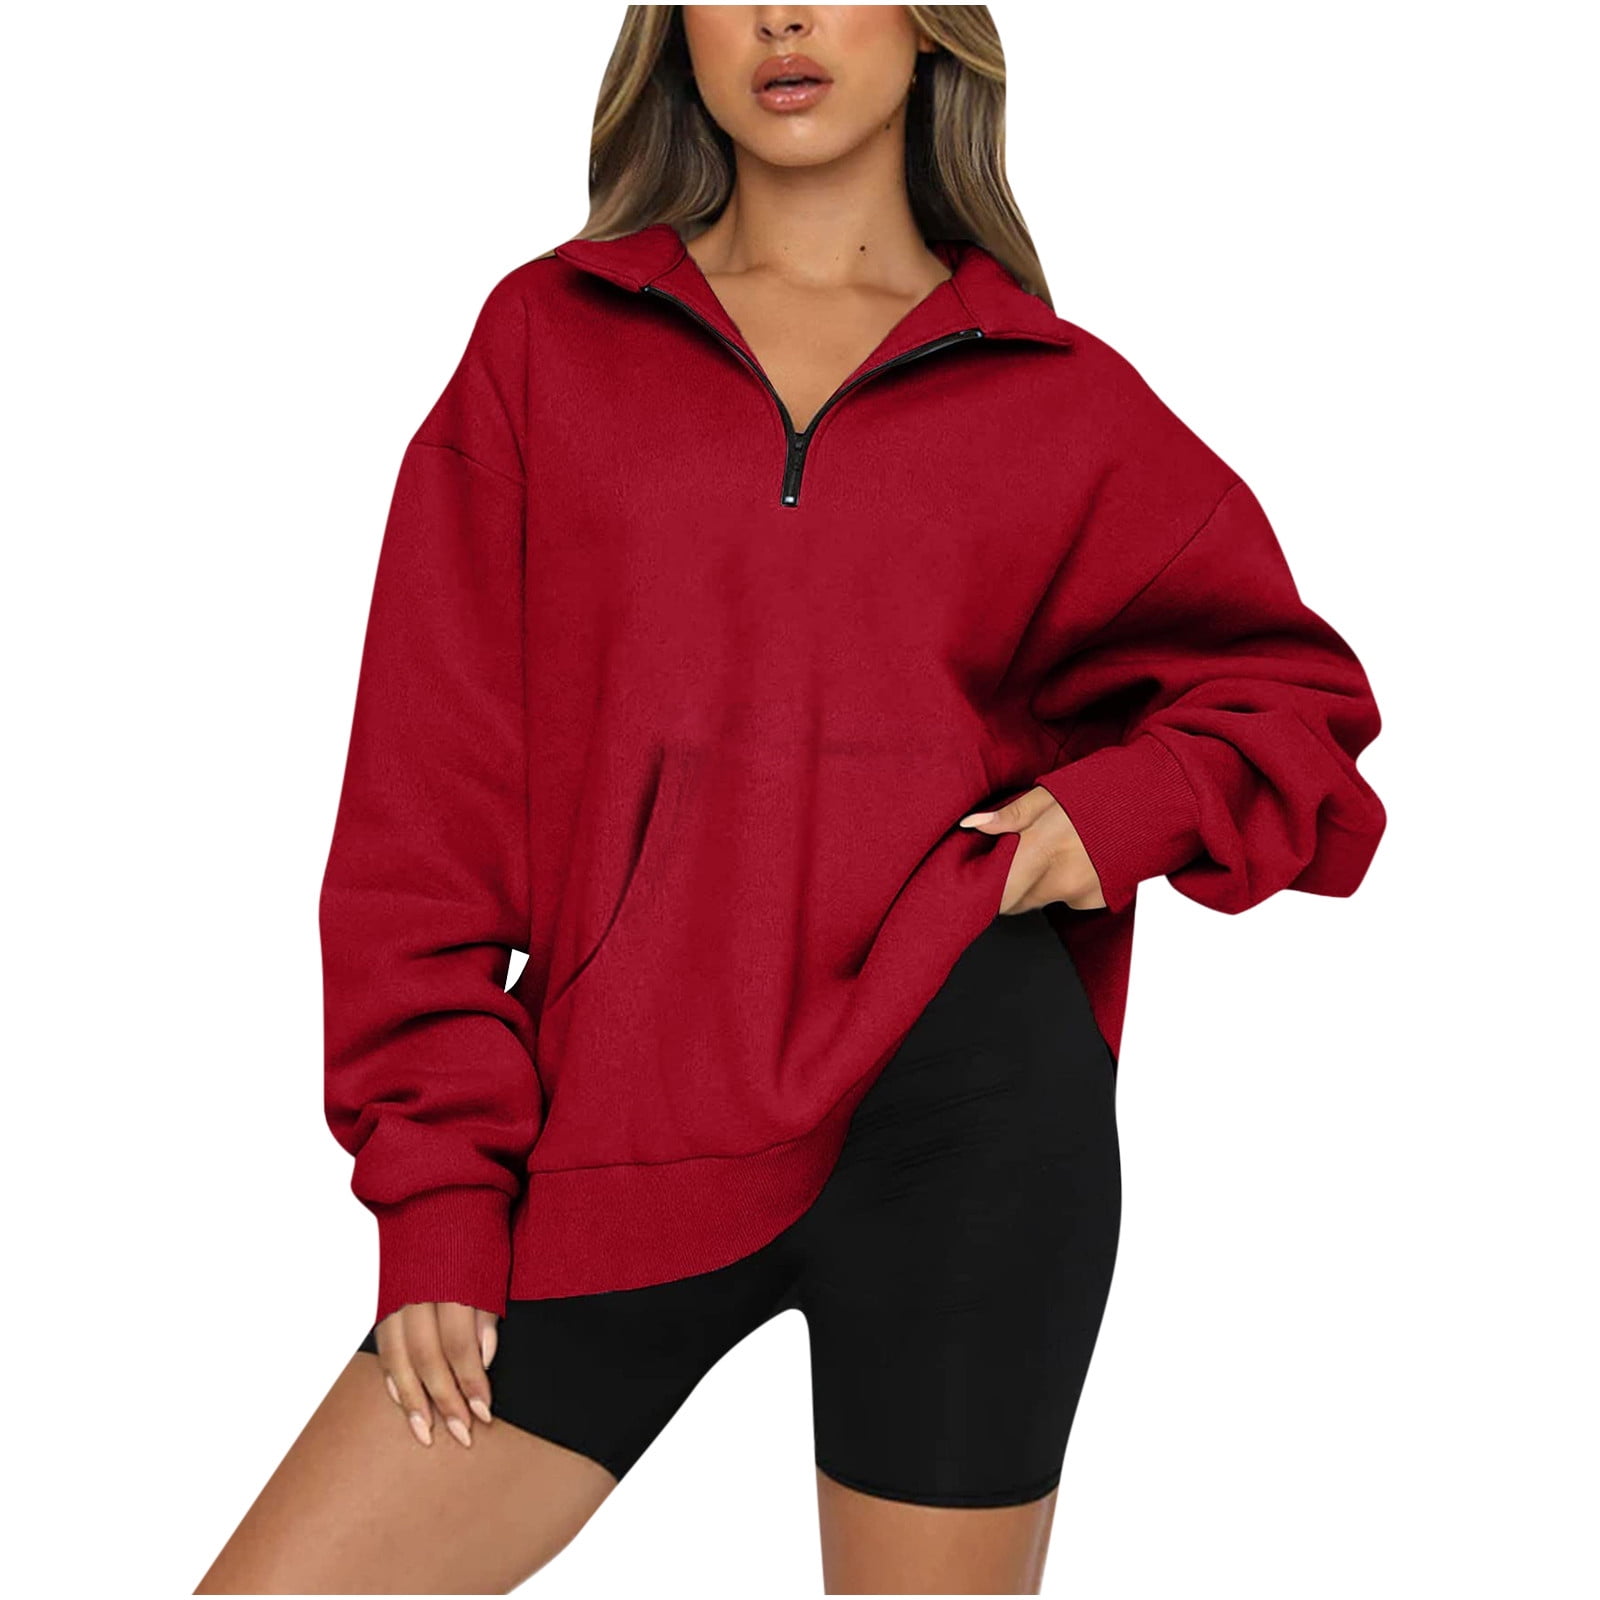 Yyeselk Womens Cropped Sweatshirts Fashion Half Zip V-Neck Long Sleeves  Pullover Fleece Hoodies 2023 Fall Clothes Trendy Outfits Red S 